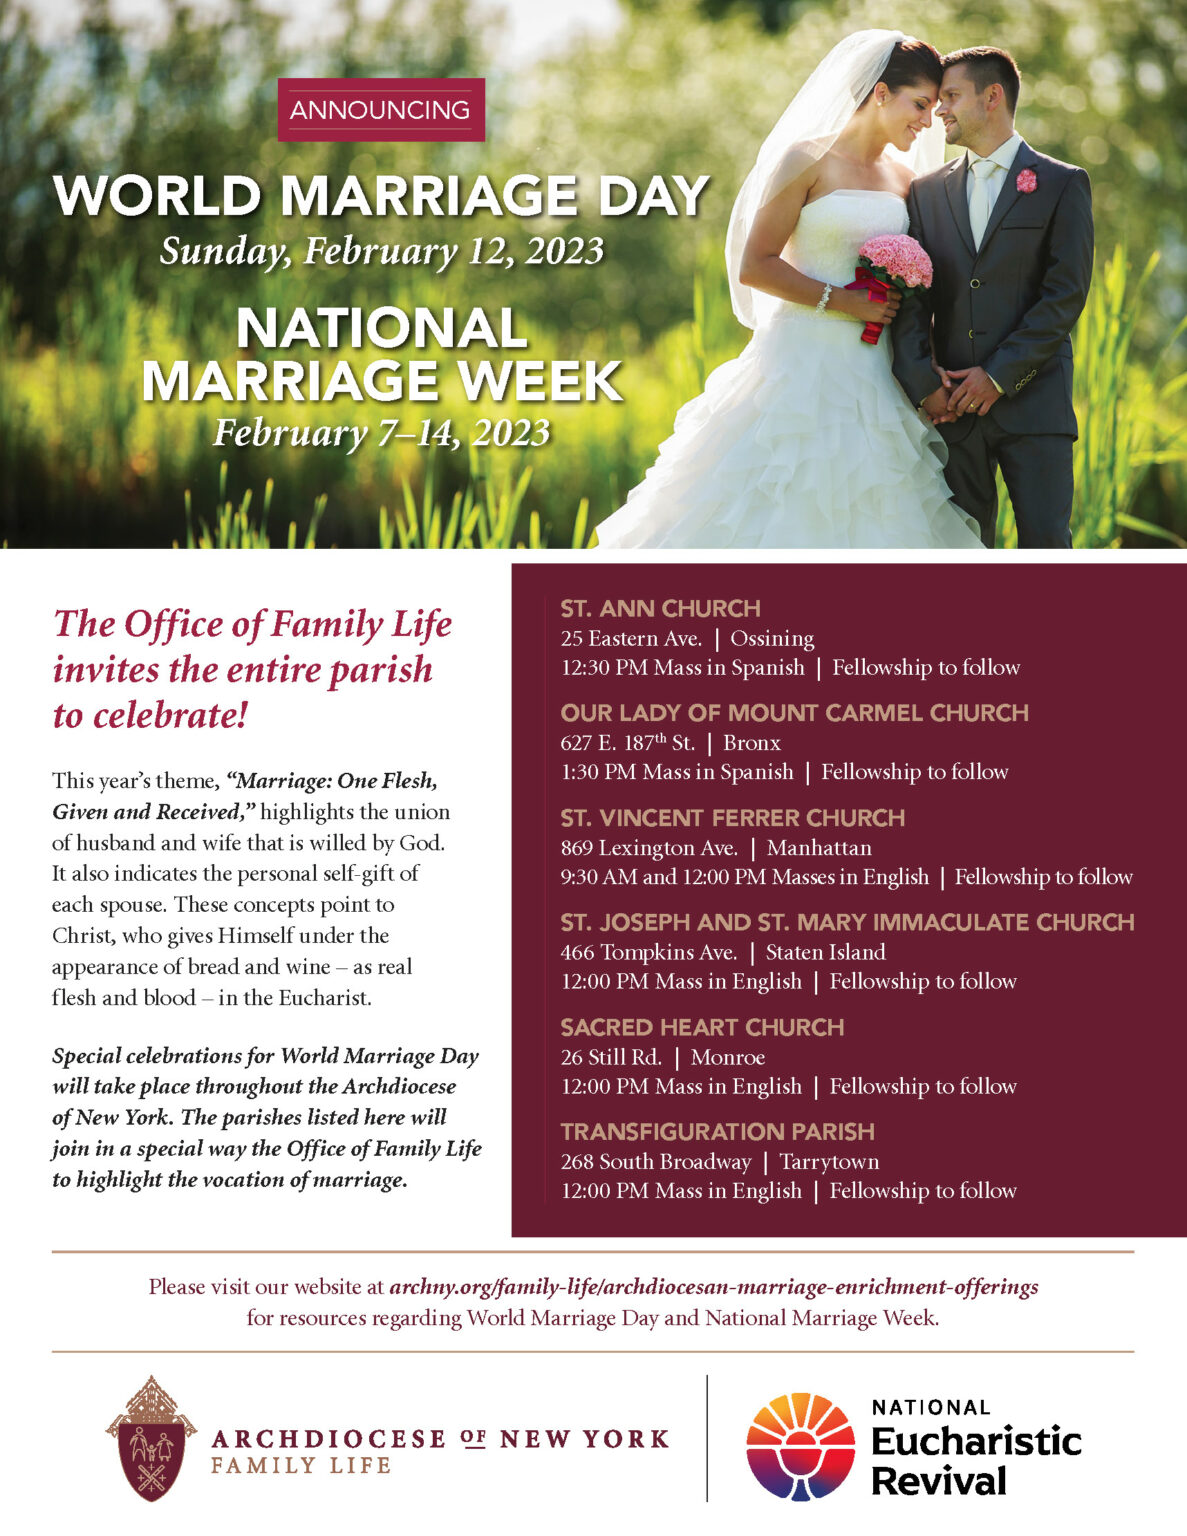 World Marriage Day Archdiocese of New York